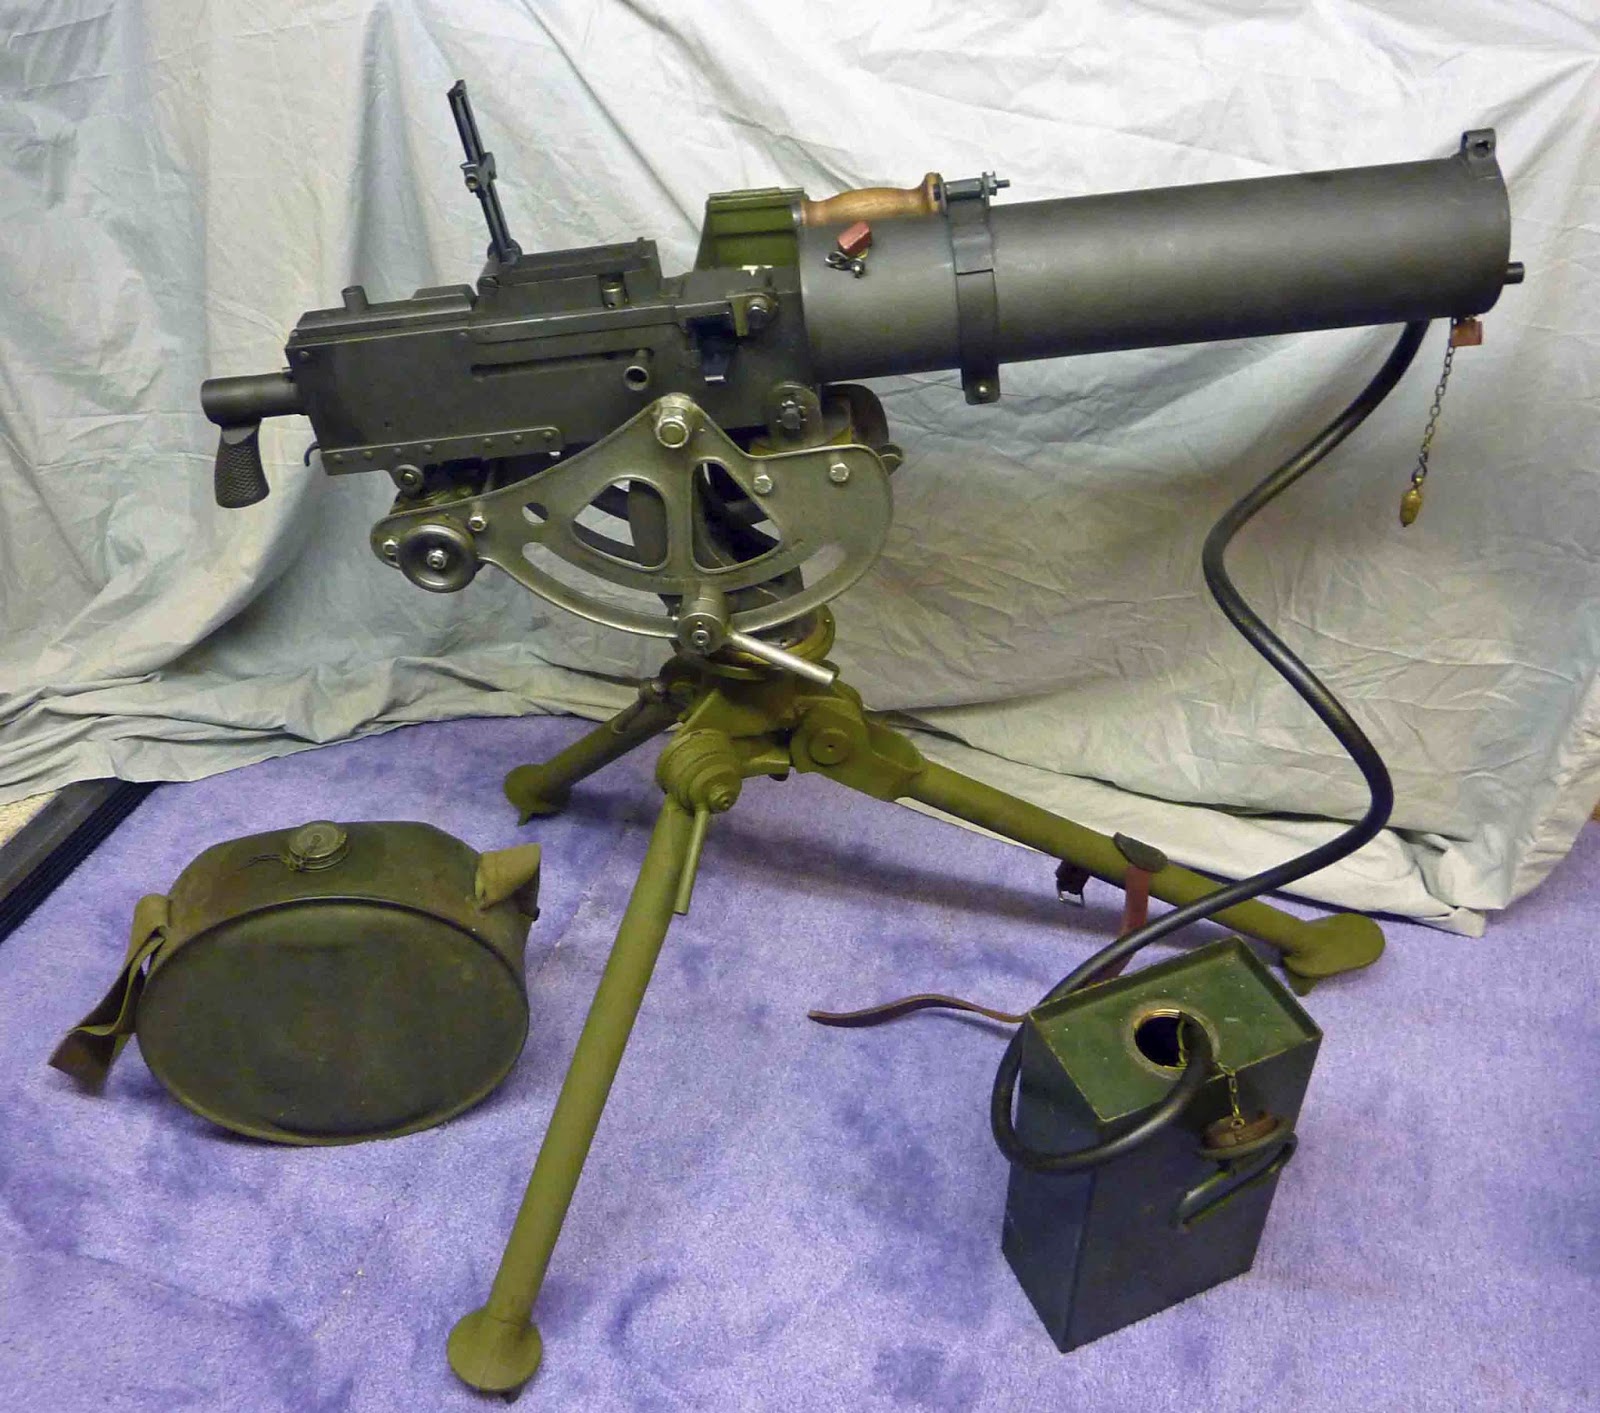 welcome to the world of weapons: M1917 Browning machine gun